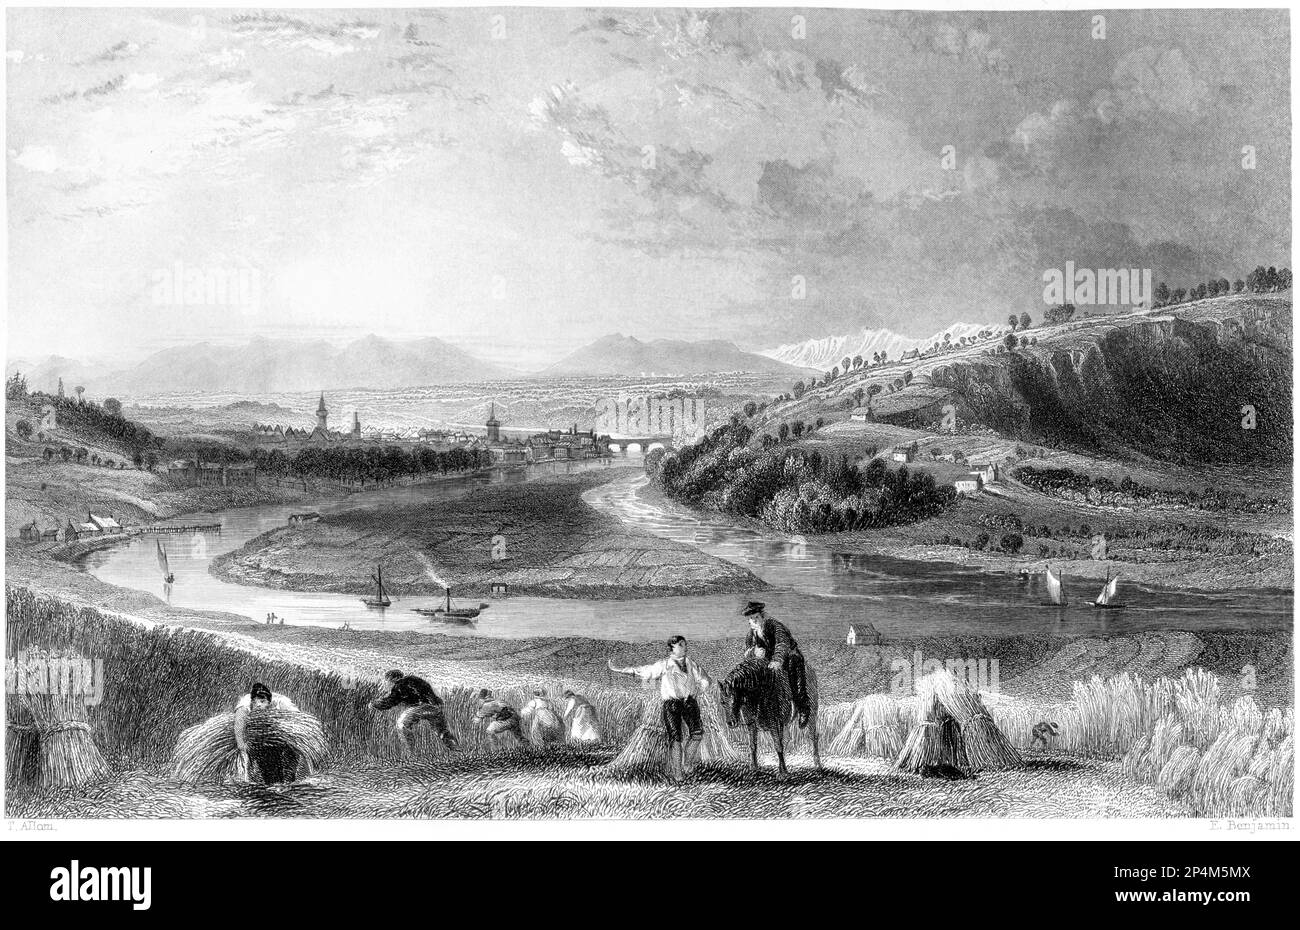 An engraving of Perth, Perthshire, Scotland UK scanned at high resolution from a book printed in 1840. Believed copyright free. Stock Photo